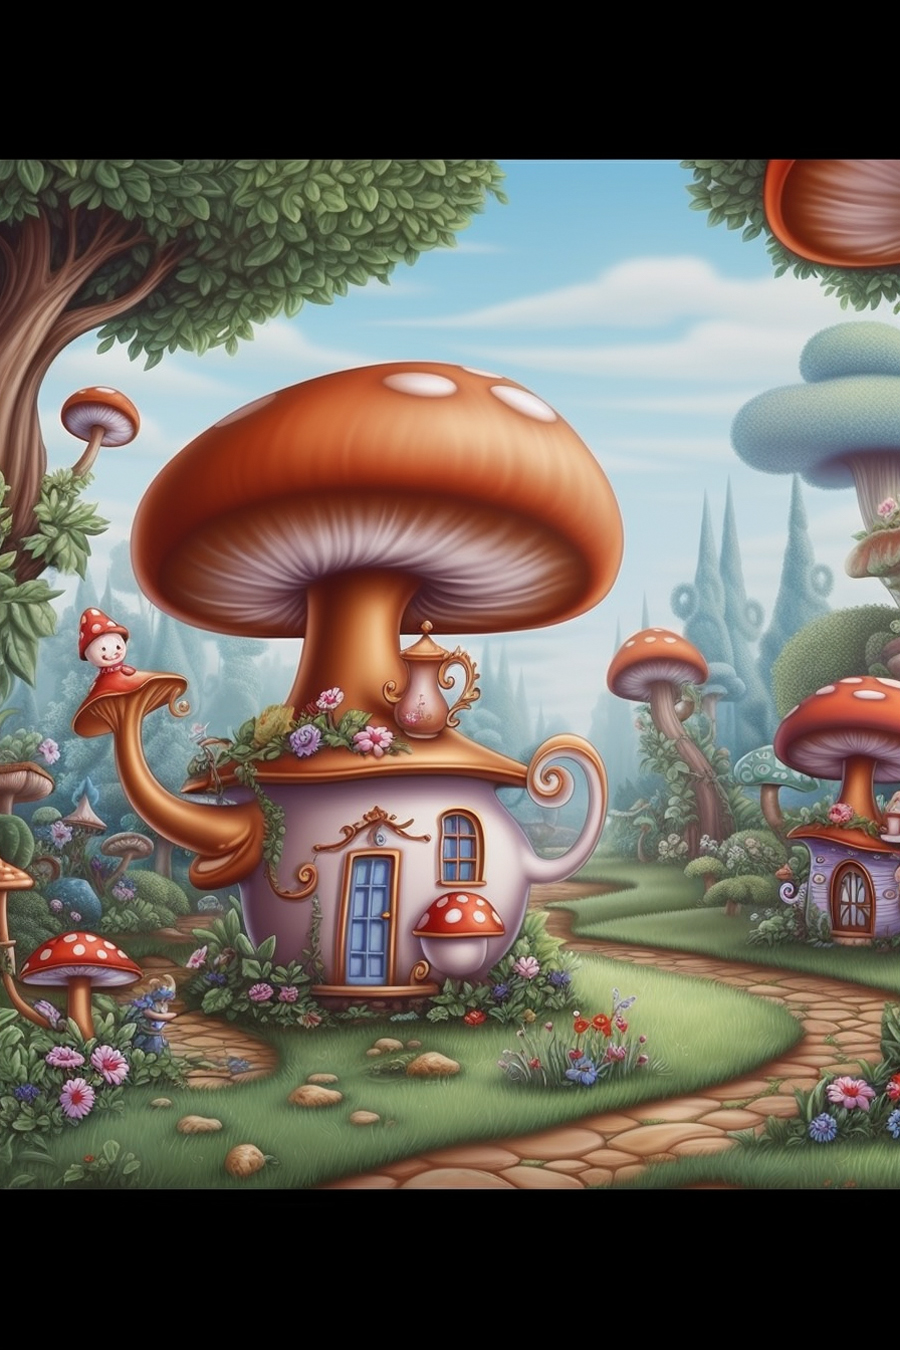 An image of a mushroom house in the forest.